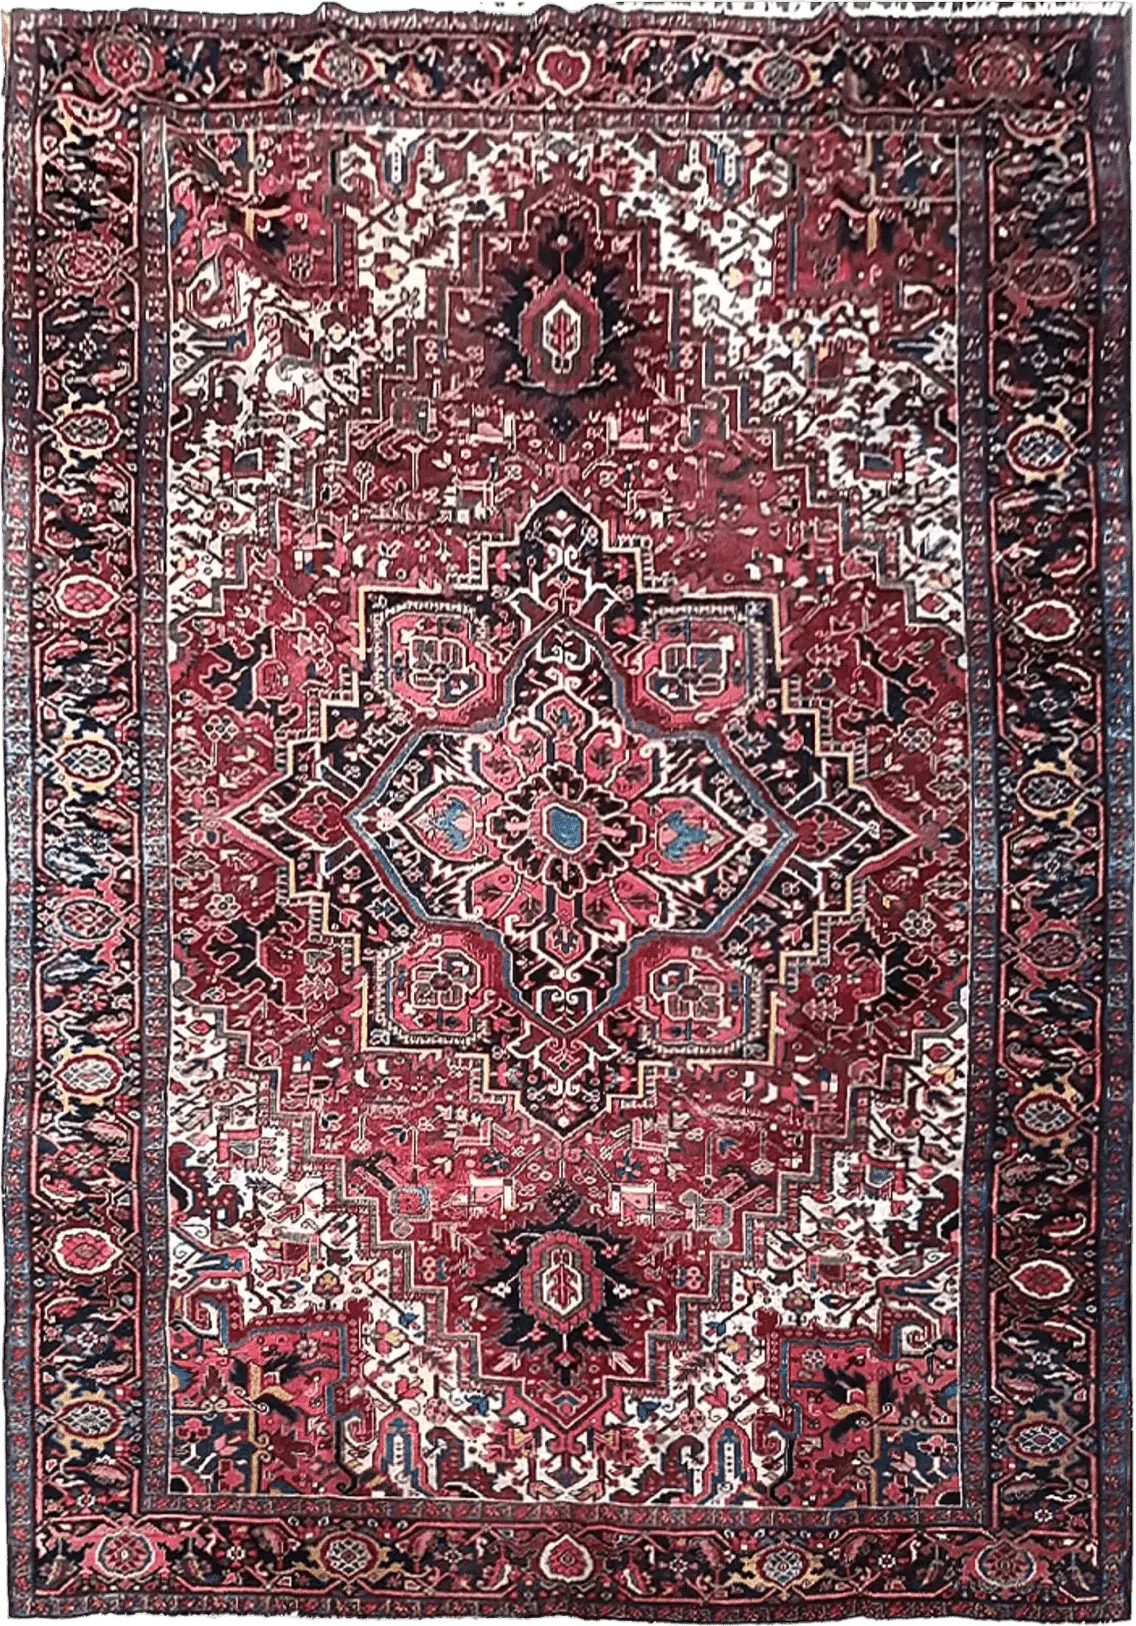 Vintage Hand Knotted Rug # 3156 | 7’ 10” x 10’ 8” - Krazy For Rugs